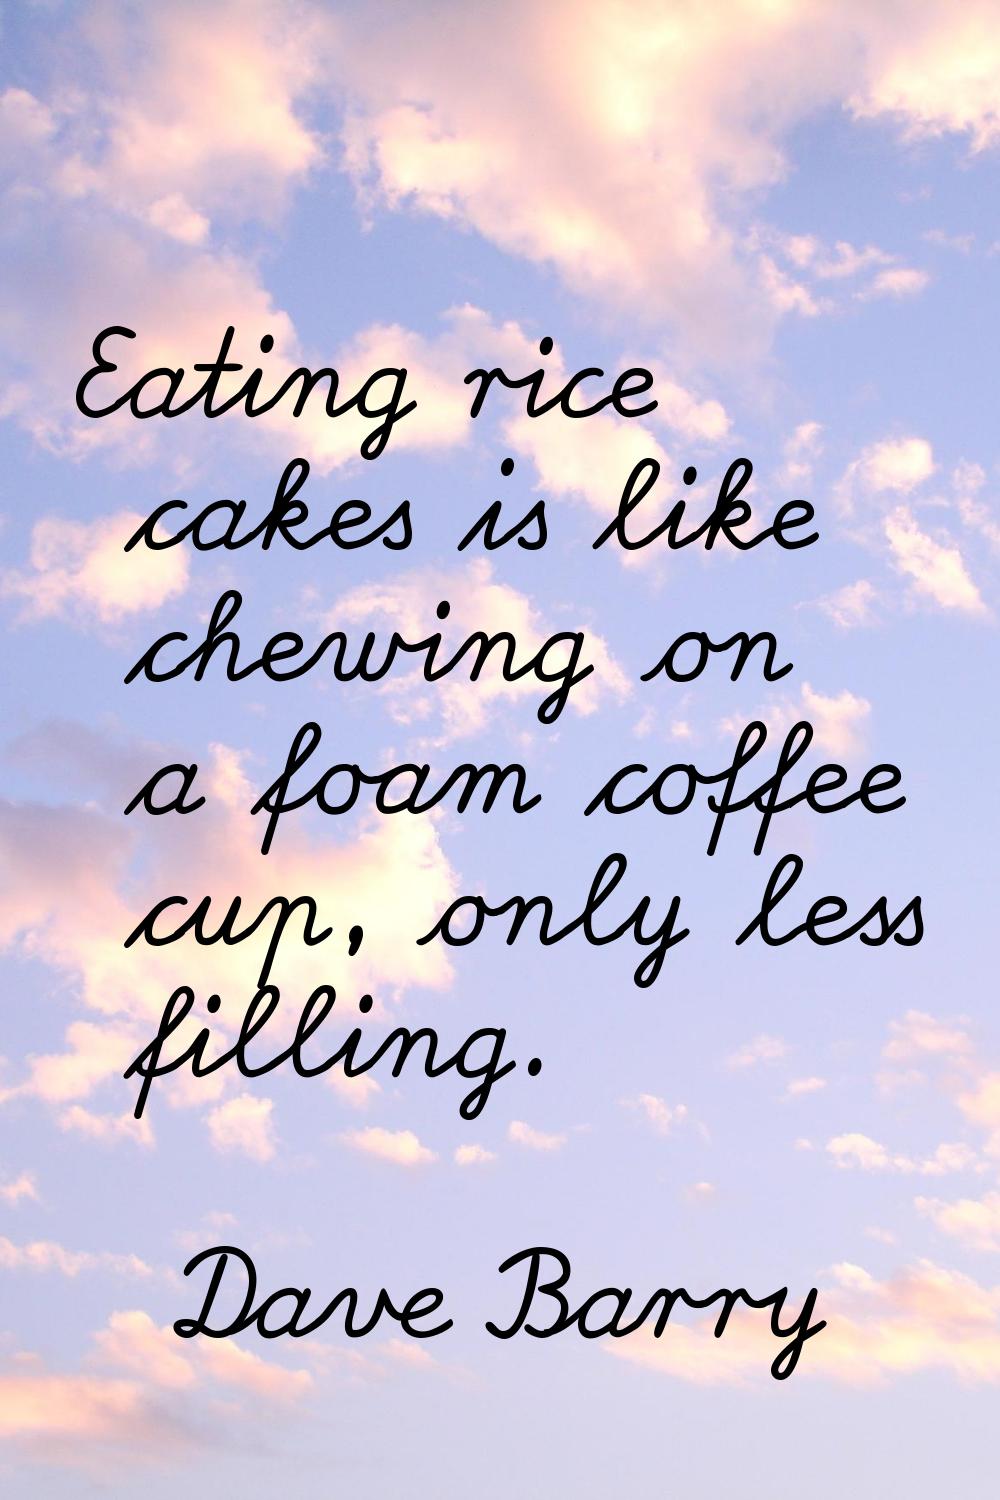 Eating rice cakes is like chewing on a foam coffee cup, only less filling.